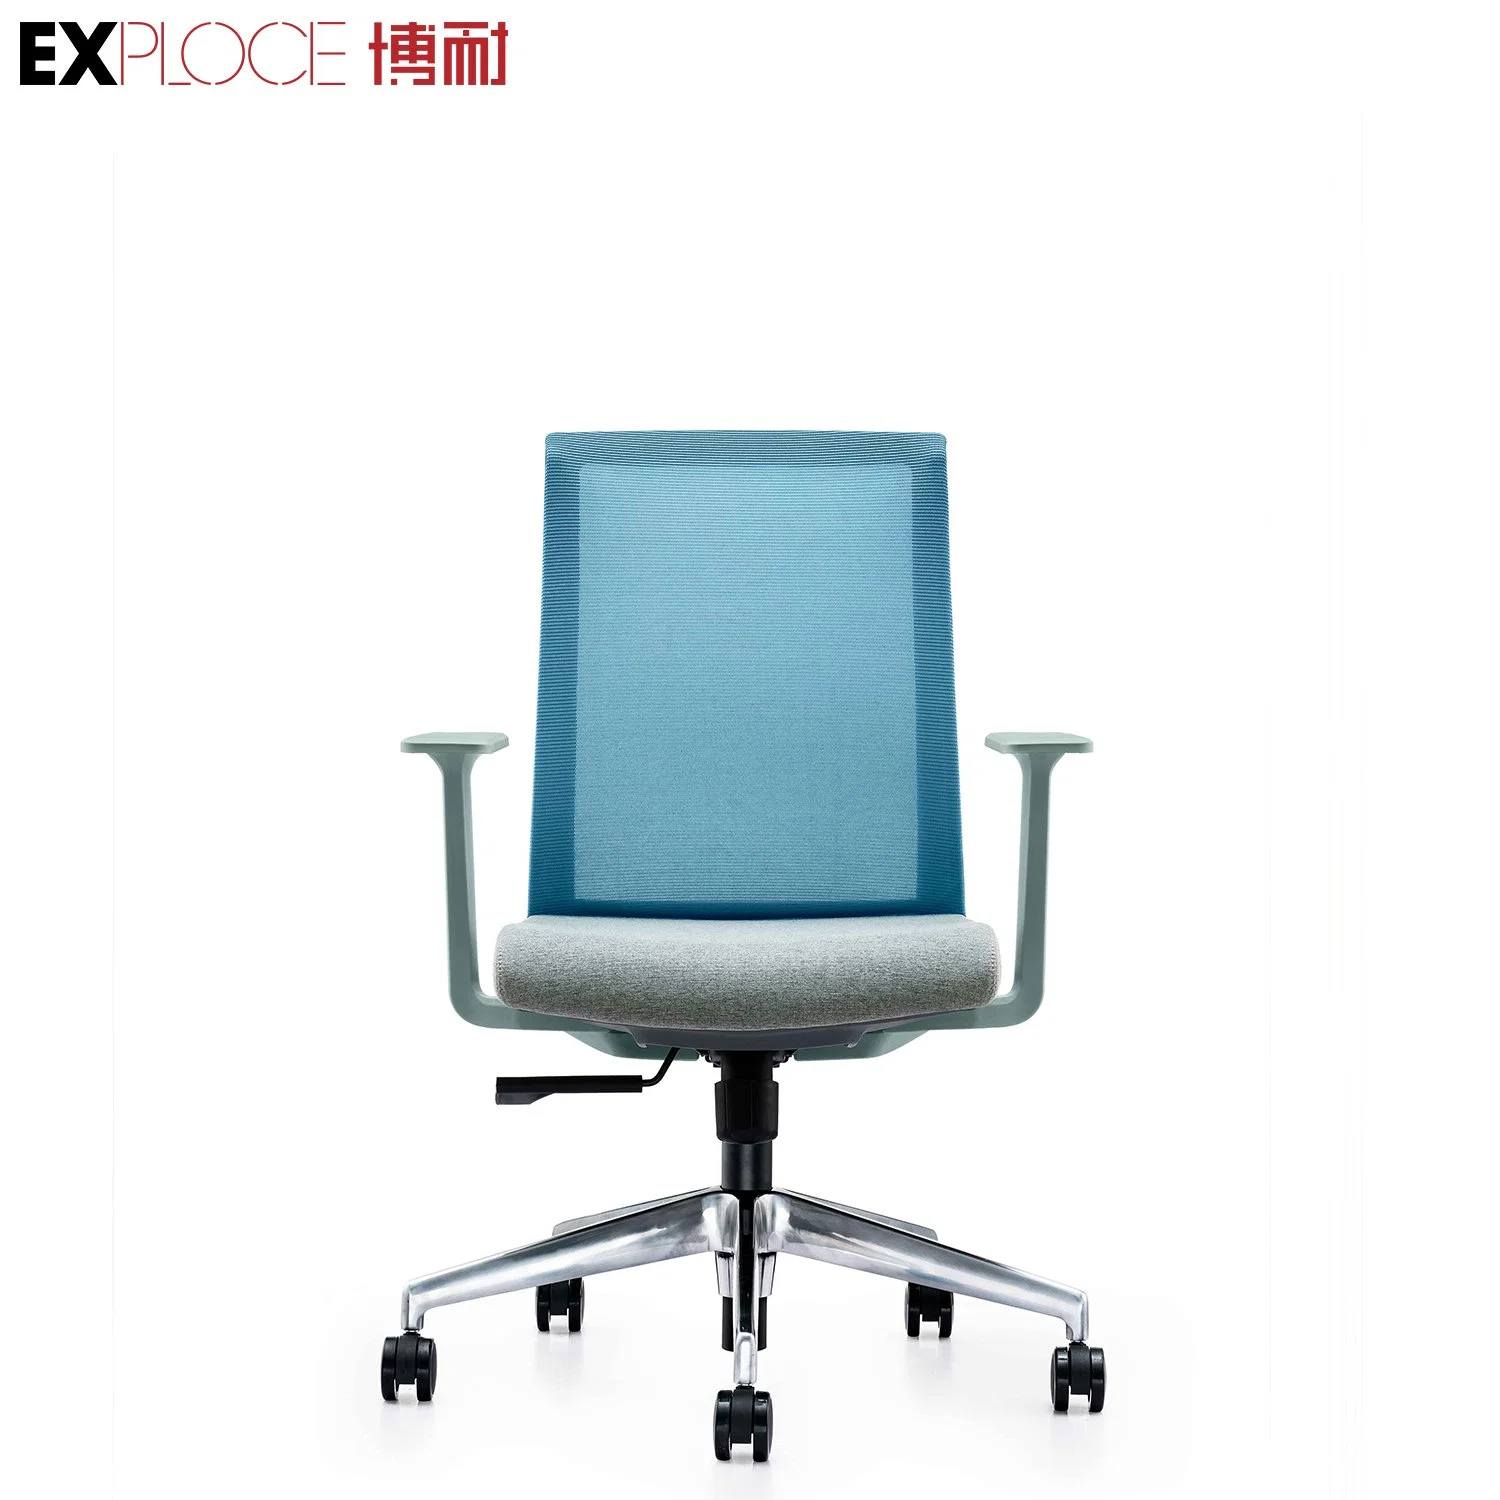 Modern Cheap Price Manager Desk Chairs Executive Swivel High Back Black Mesh Ergonomic Without Headrest for Office Furniture